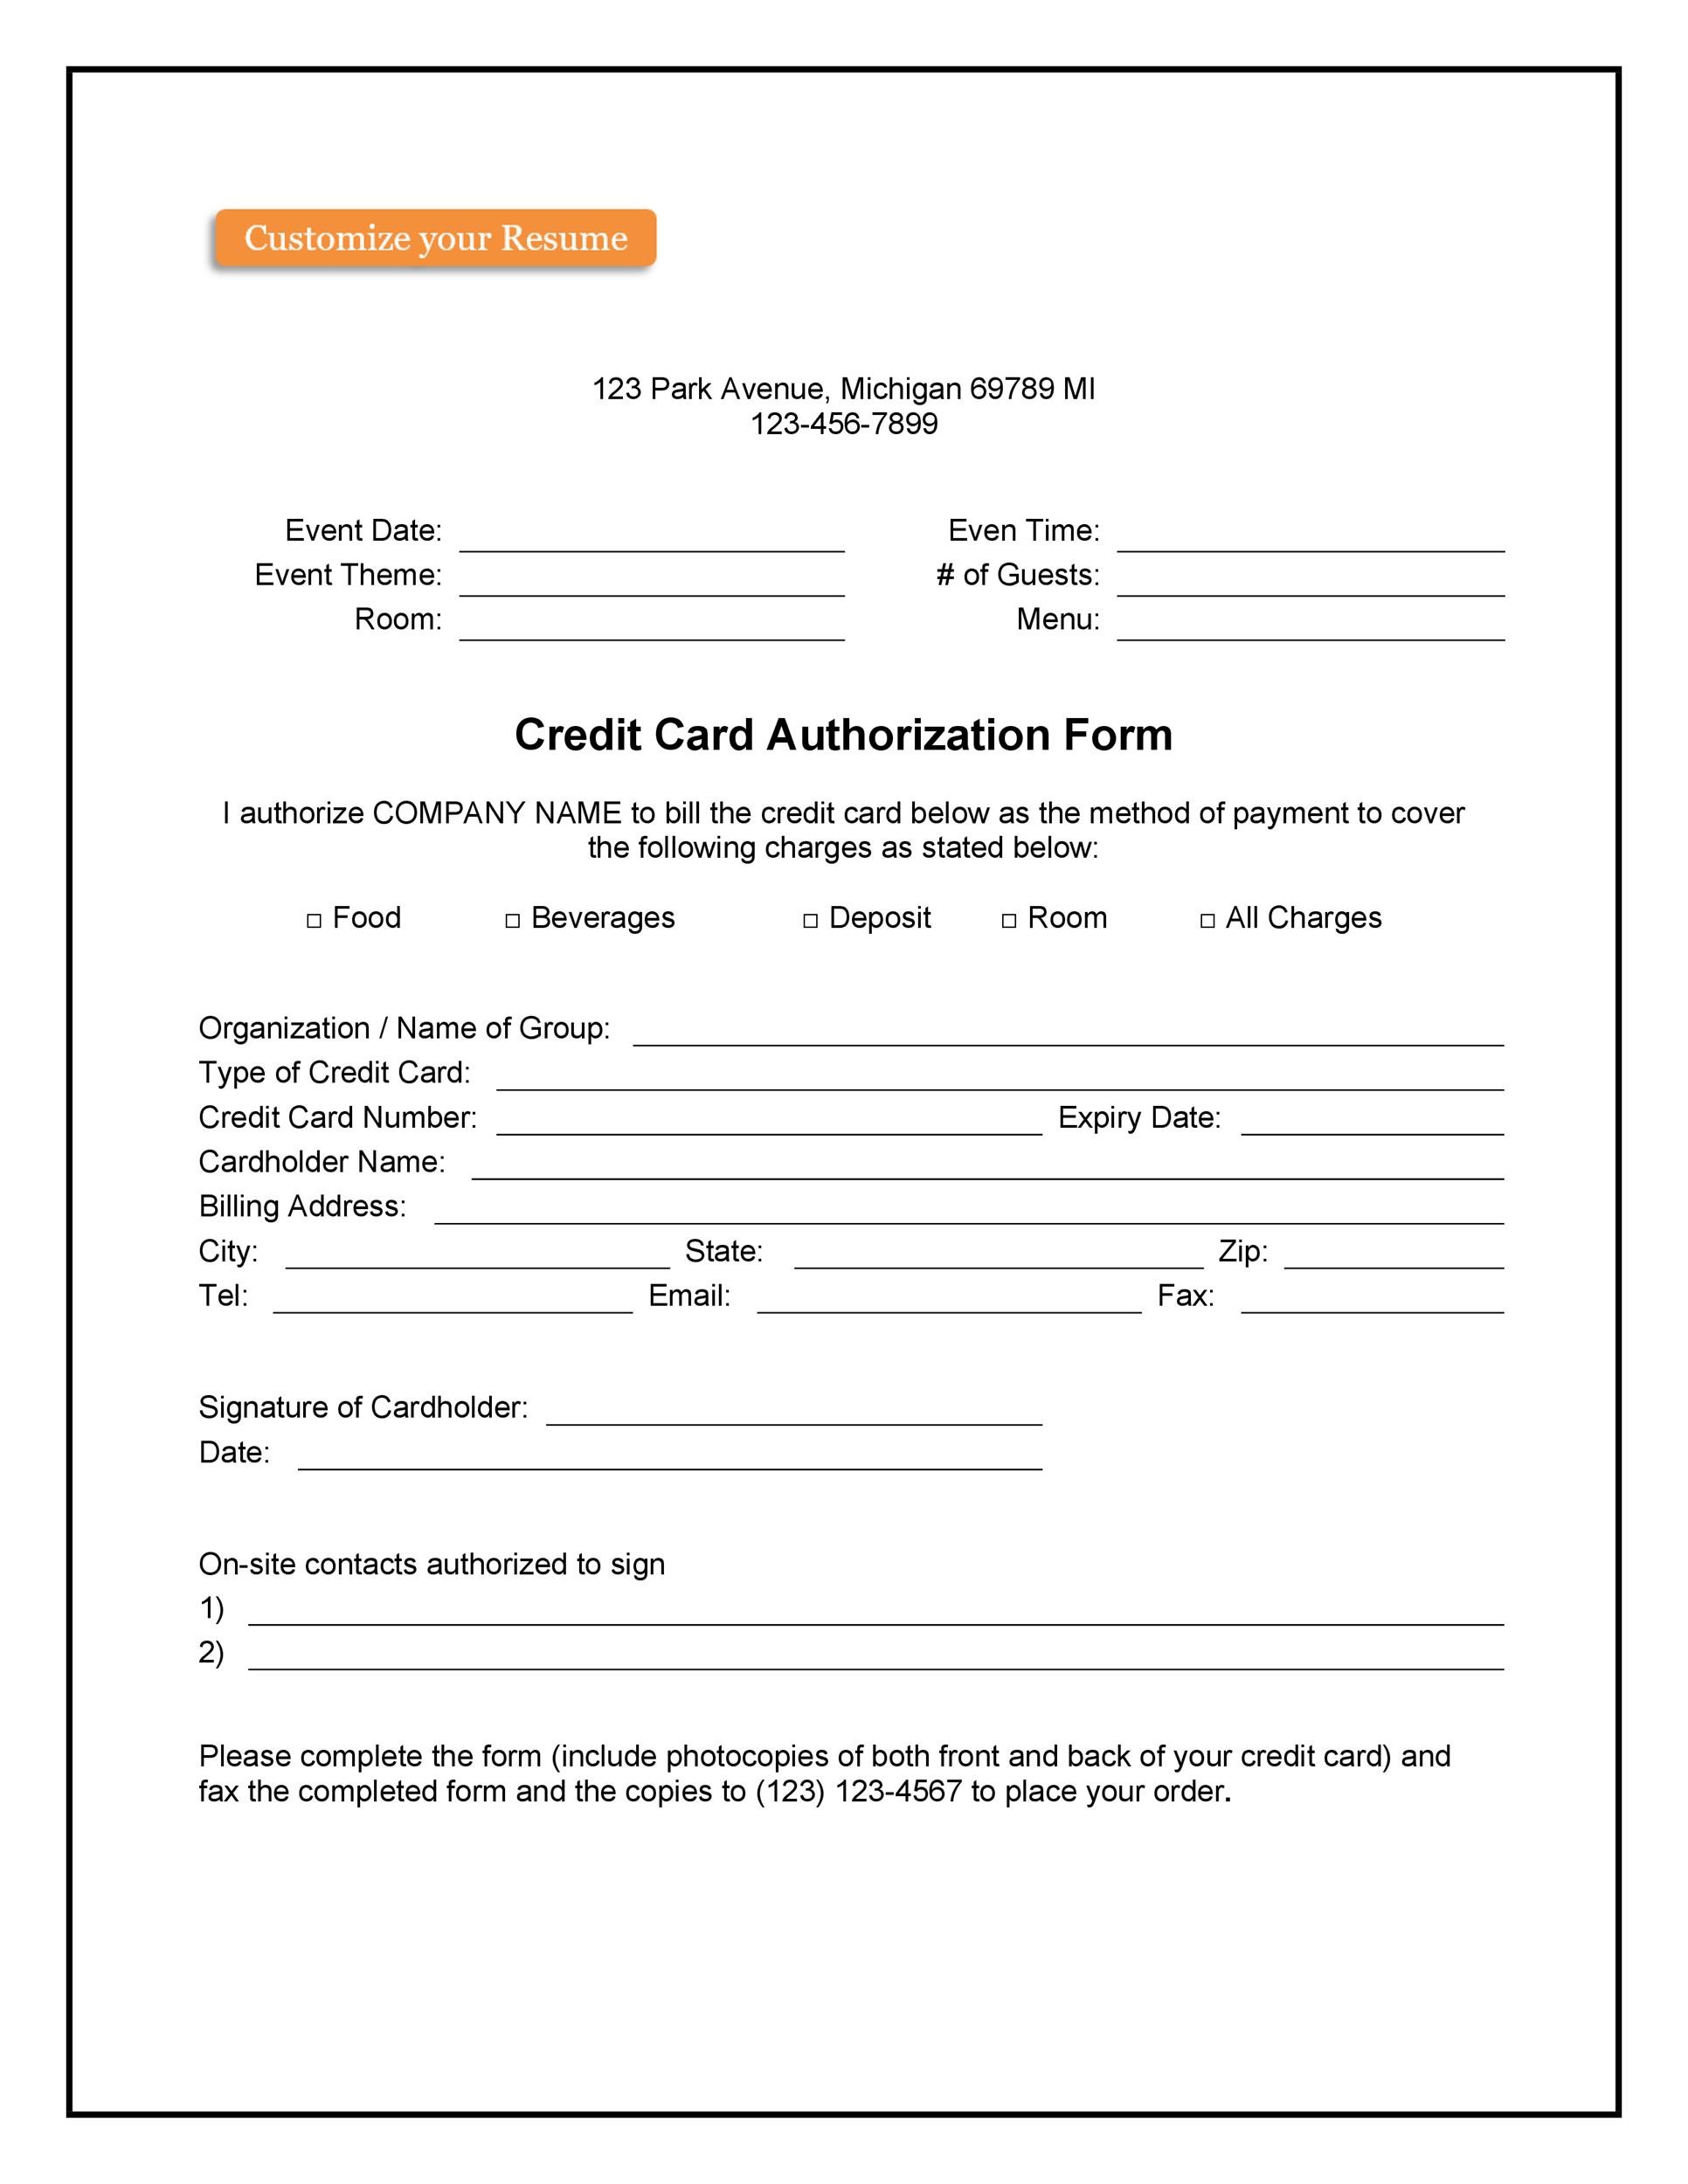 41 Credit Card Authorization Forms Templates Ready To Use 6972